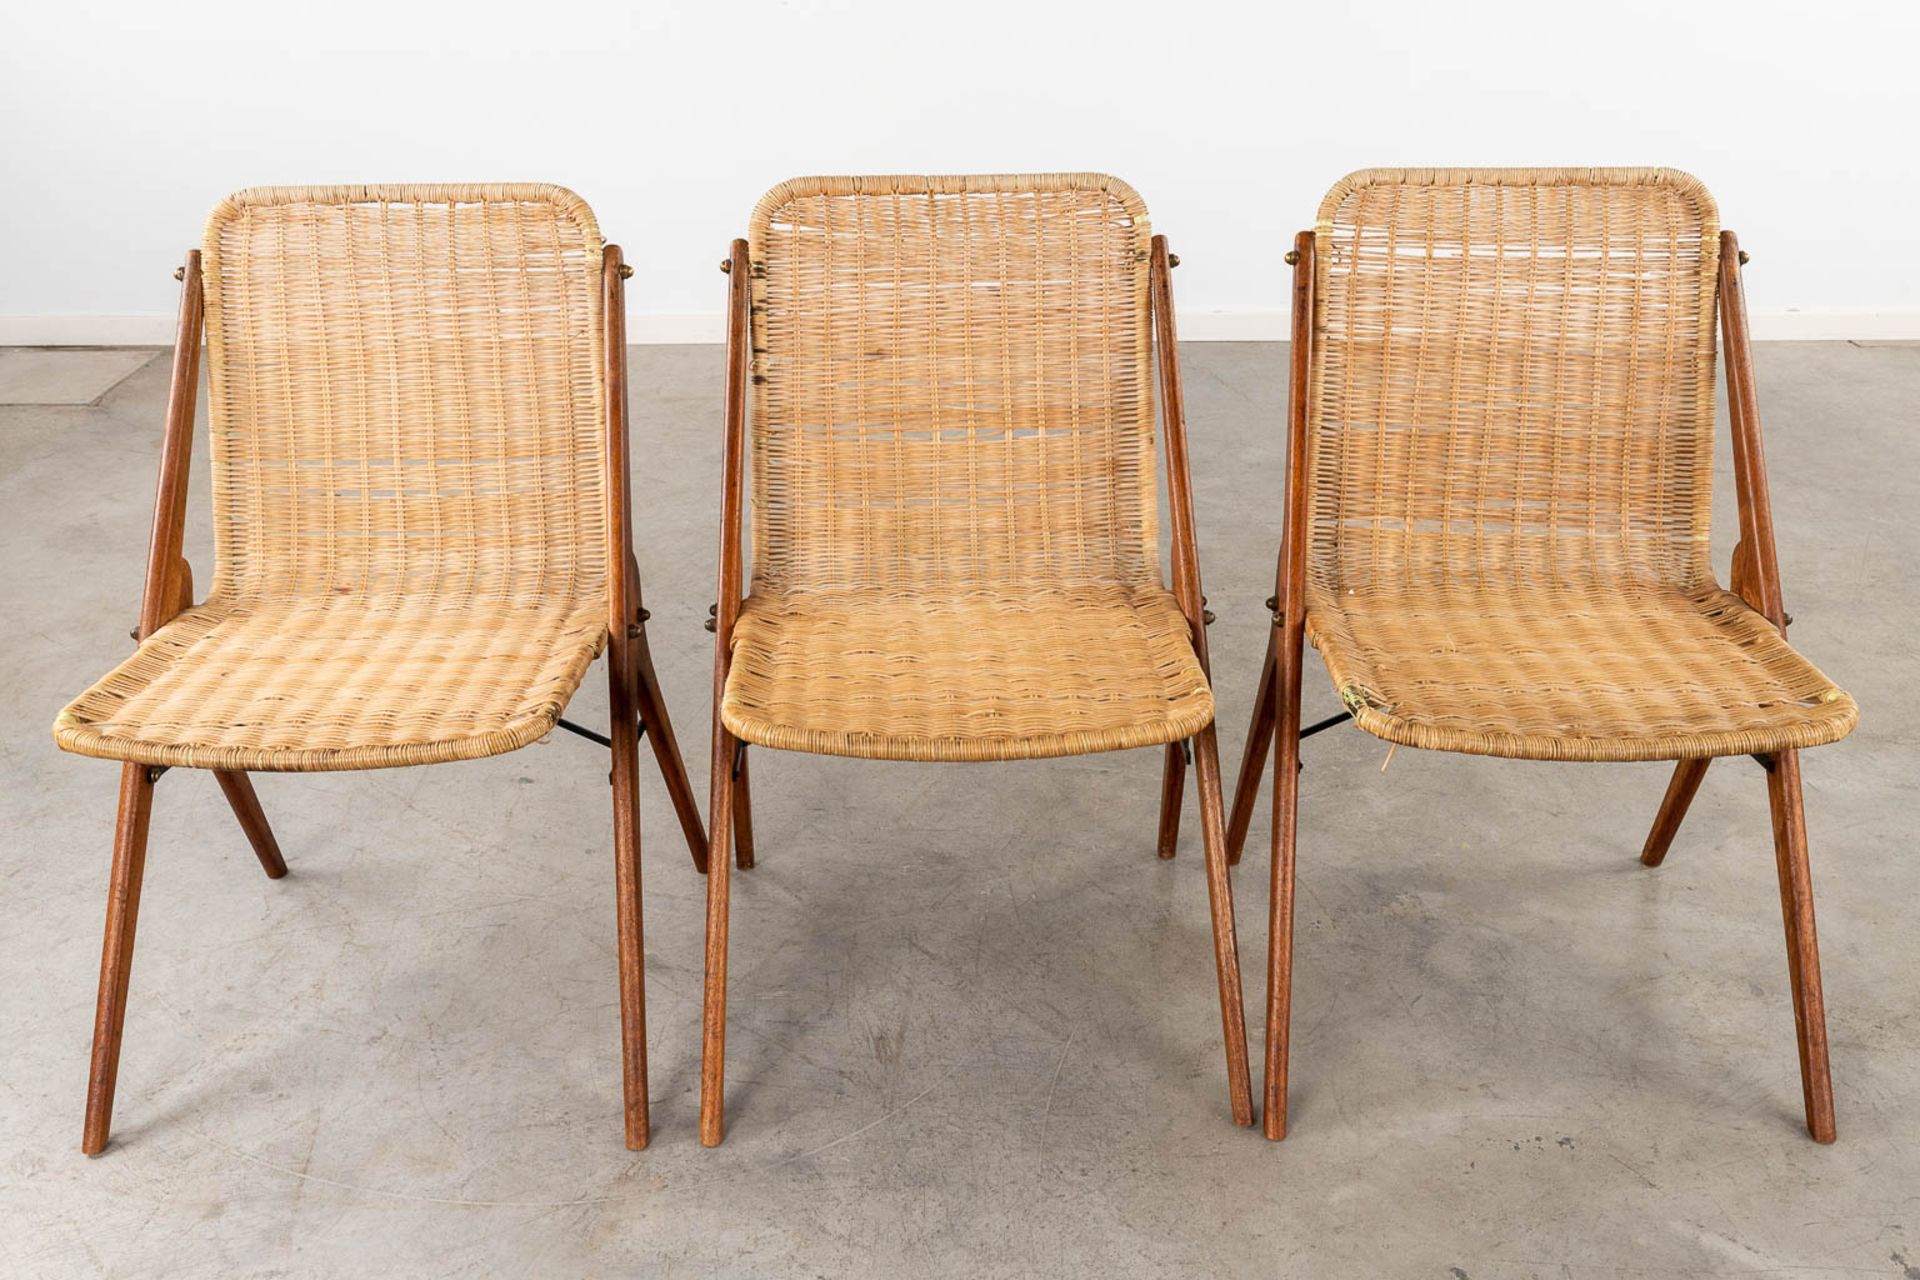 A mid-century table and 6 chairs, rotan and metal, teak wood. Circa 1960. (D:86 x W:160 x H:76 cm) - Image 23 of 31